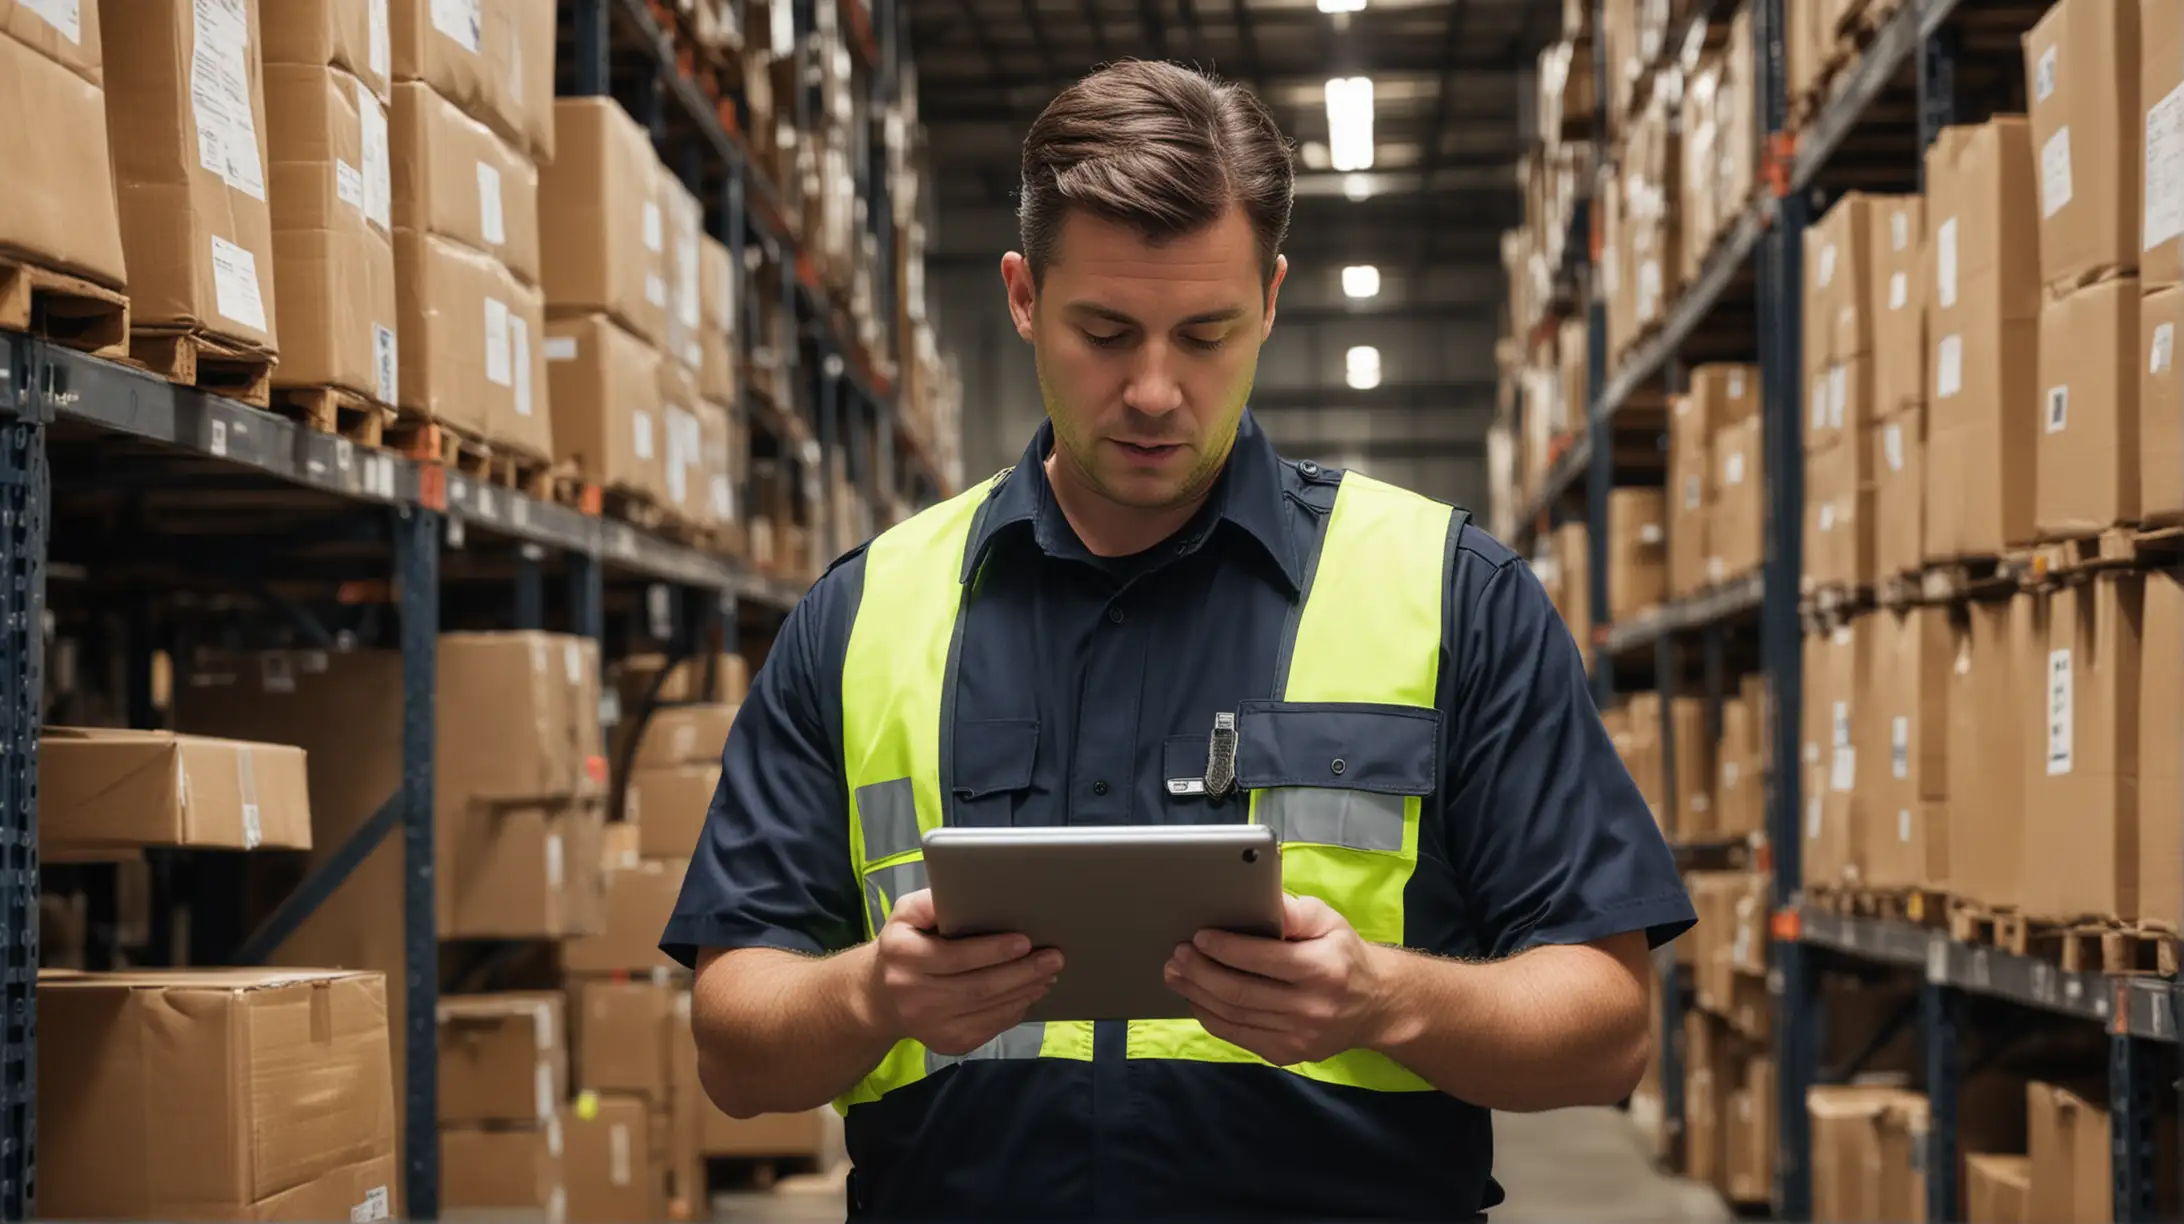 Officer working in warehouse through tablet with a text space